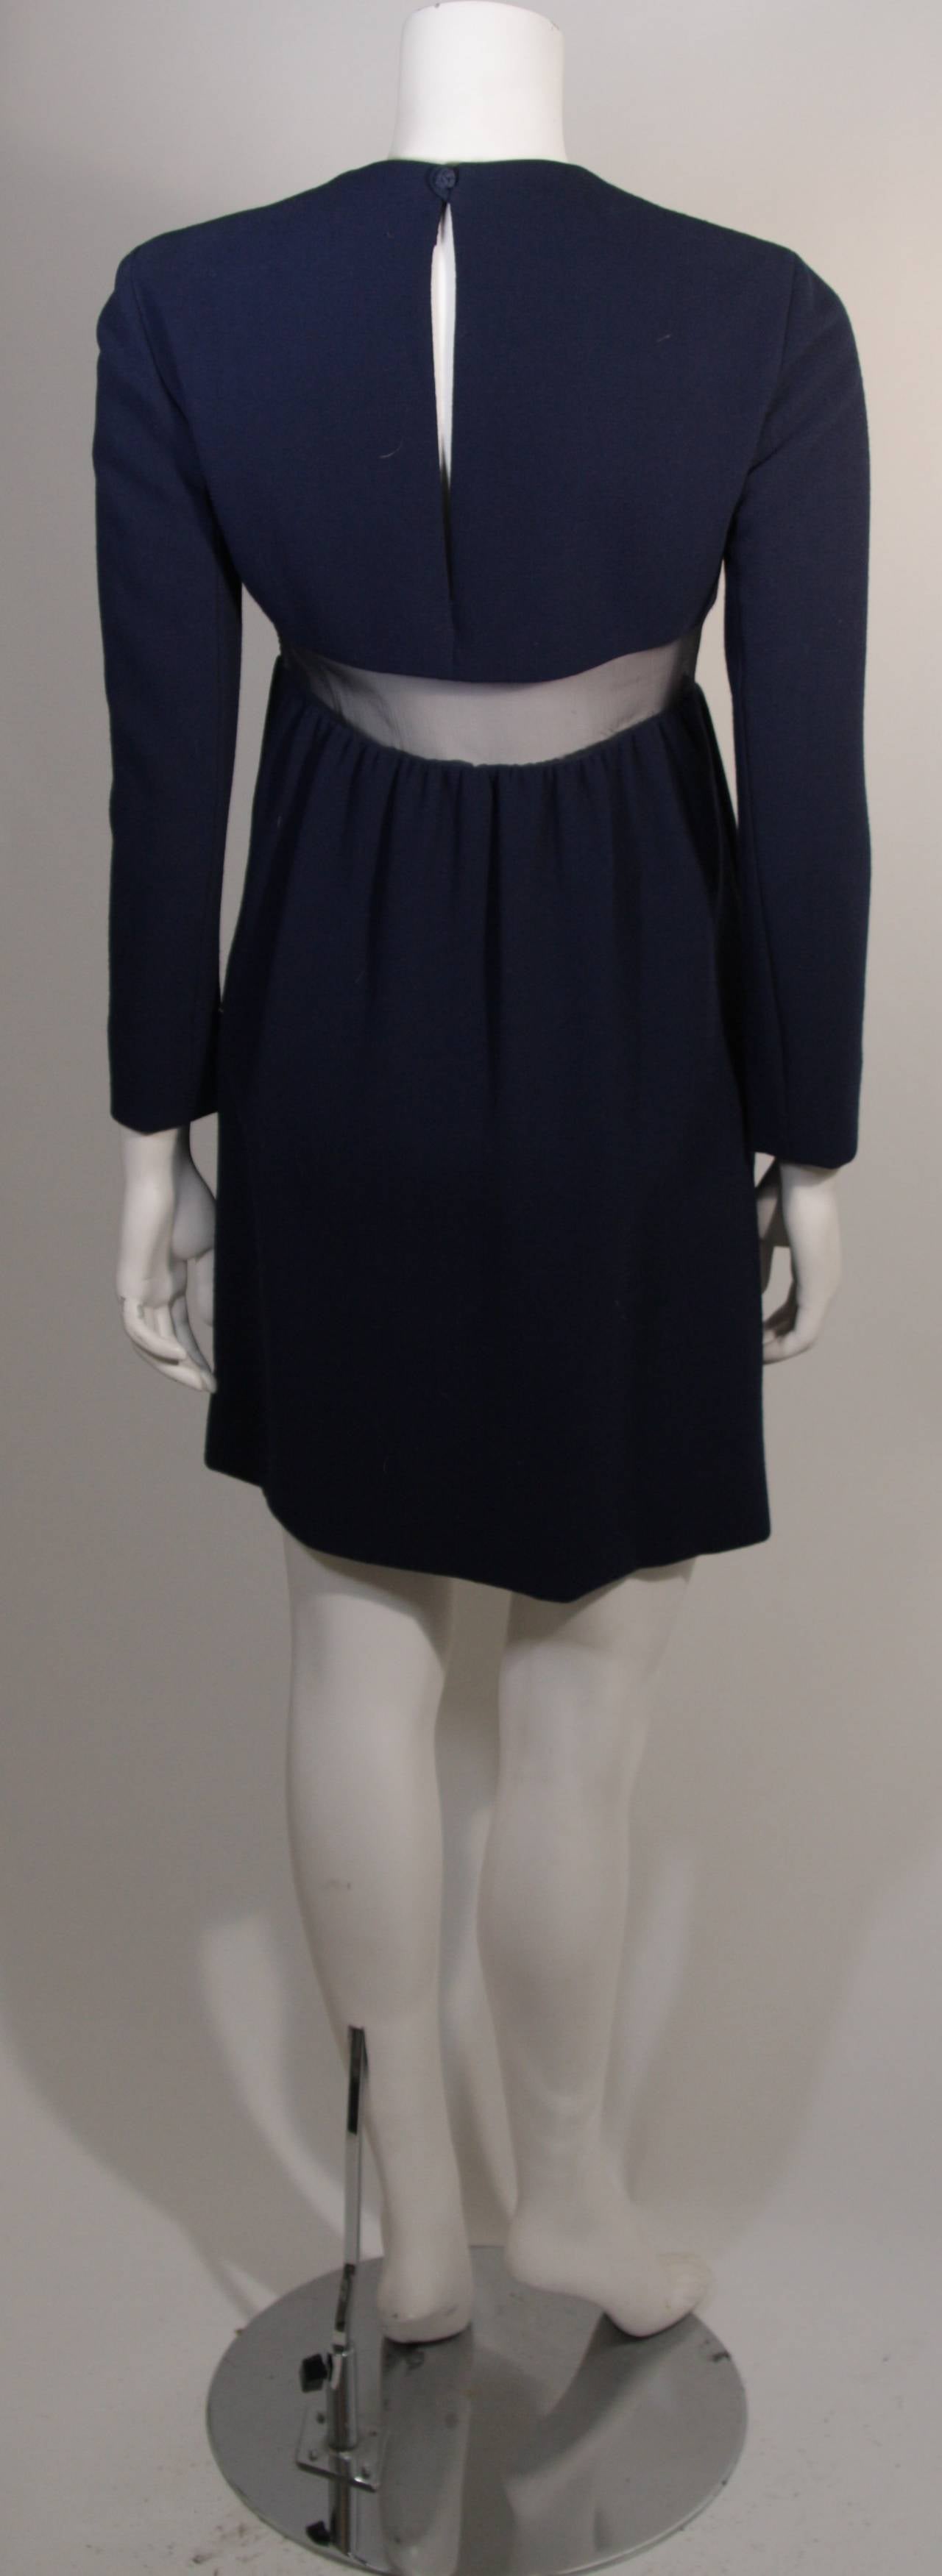 Women's Galanos Navy Wool Mini Dress with Peek-a-boo Mesh Panel size 4 For Sale